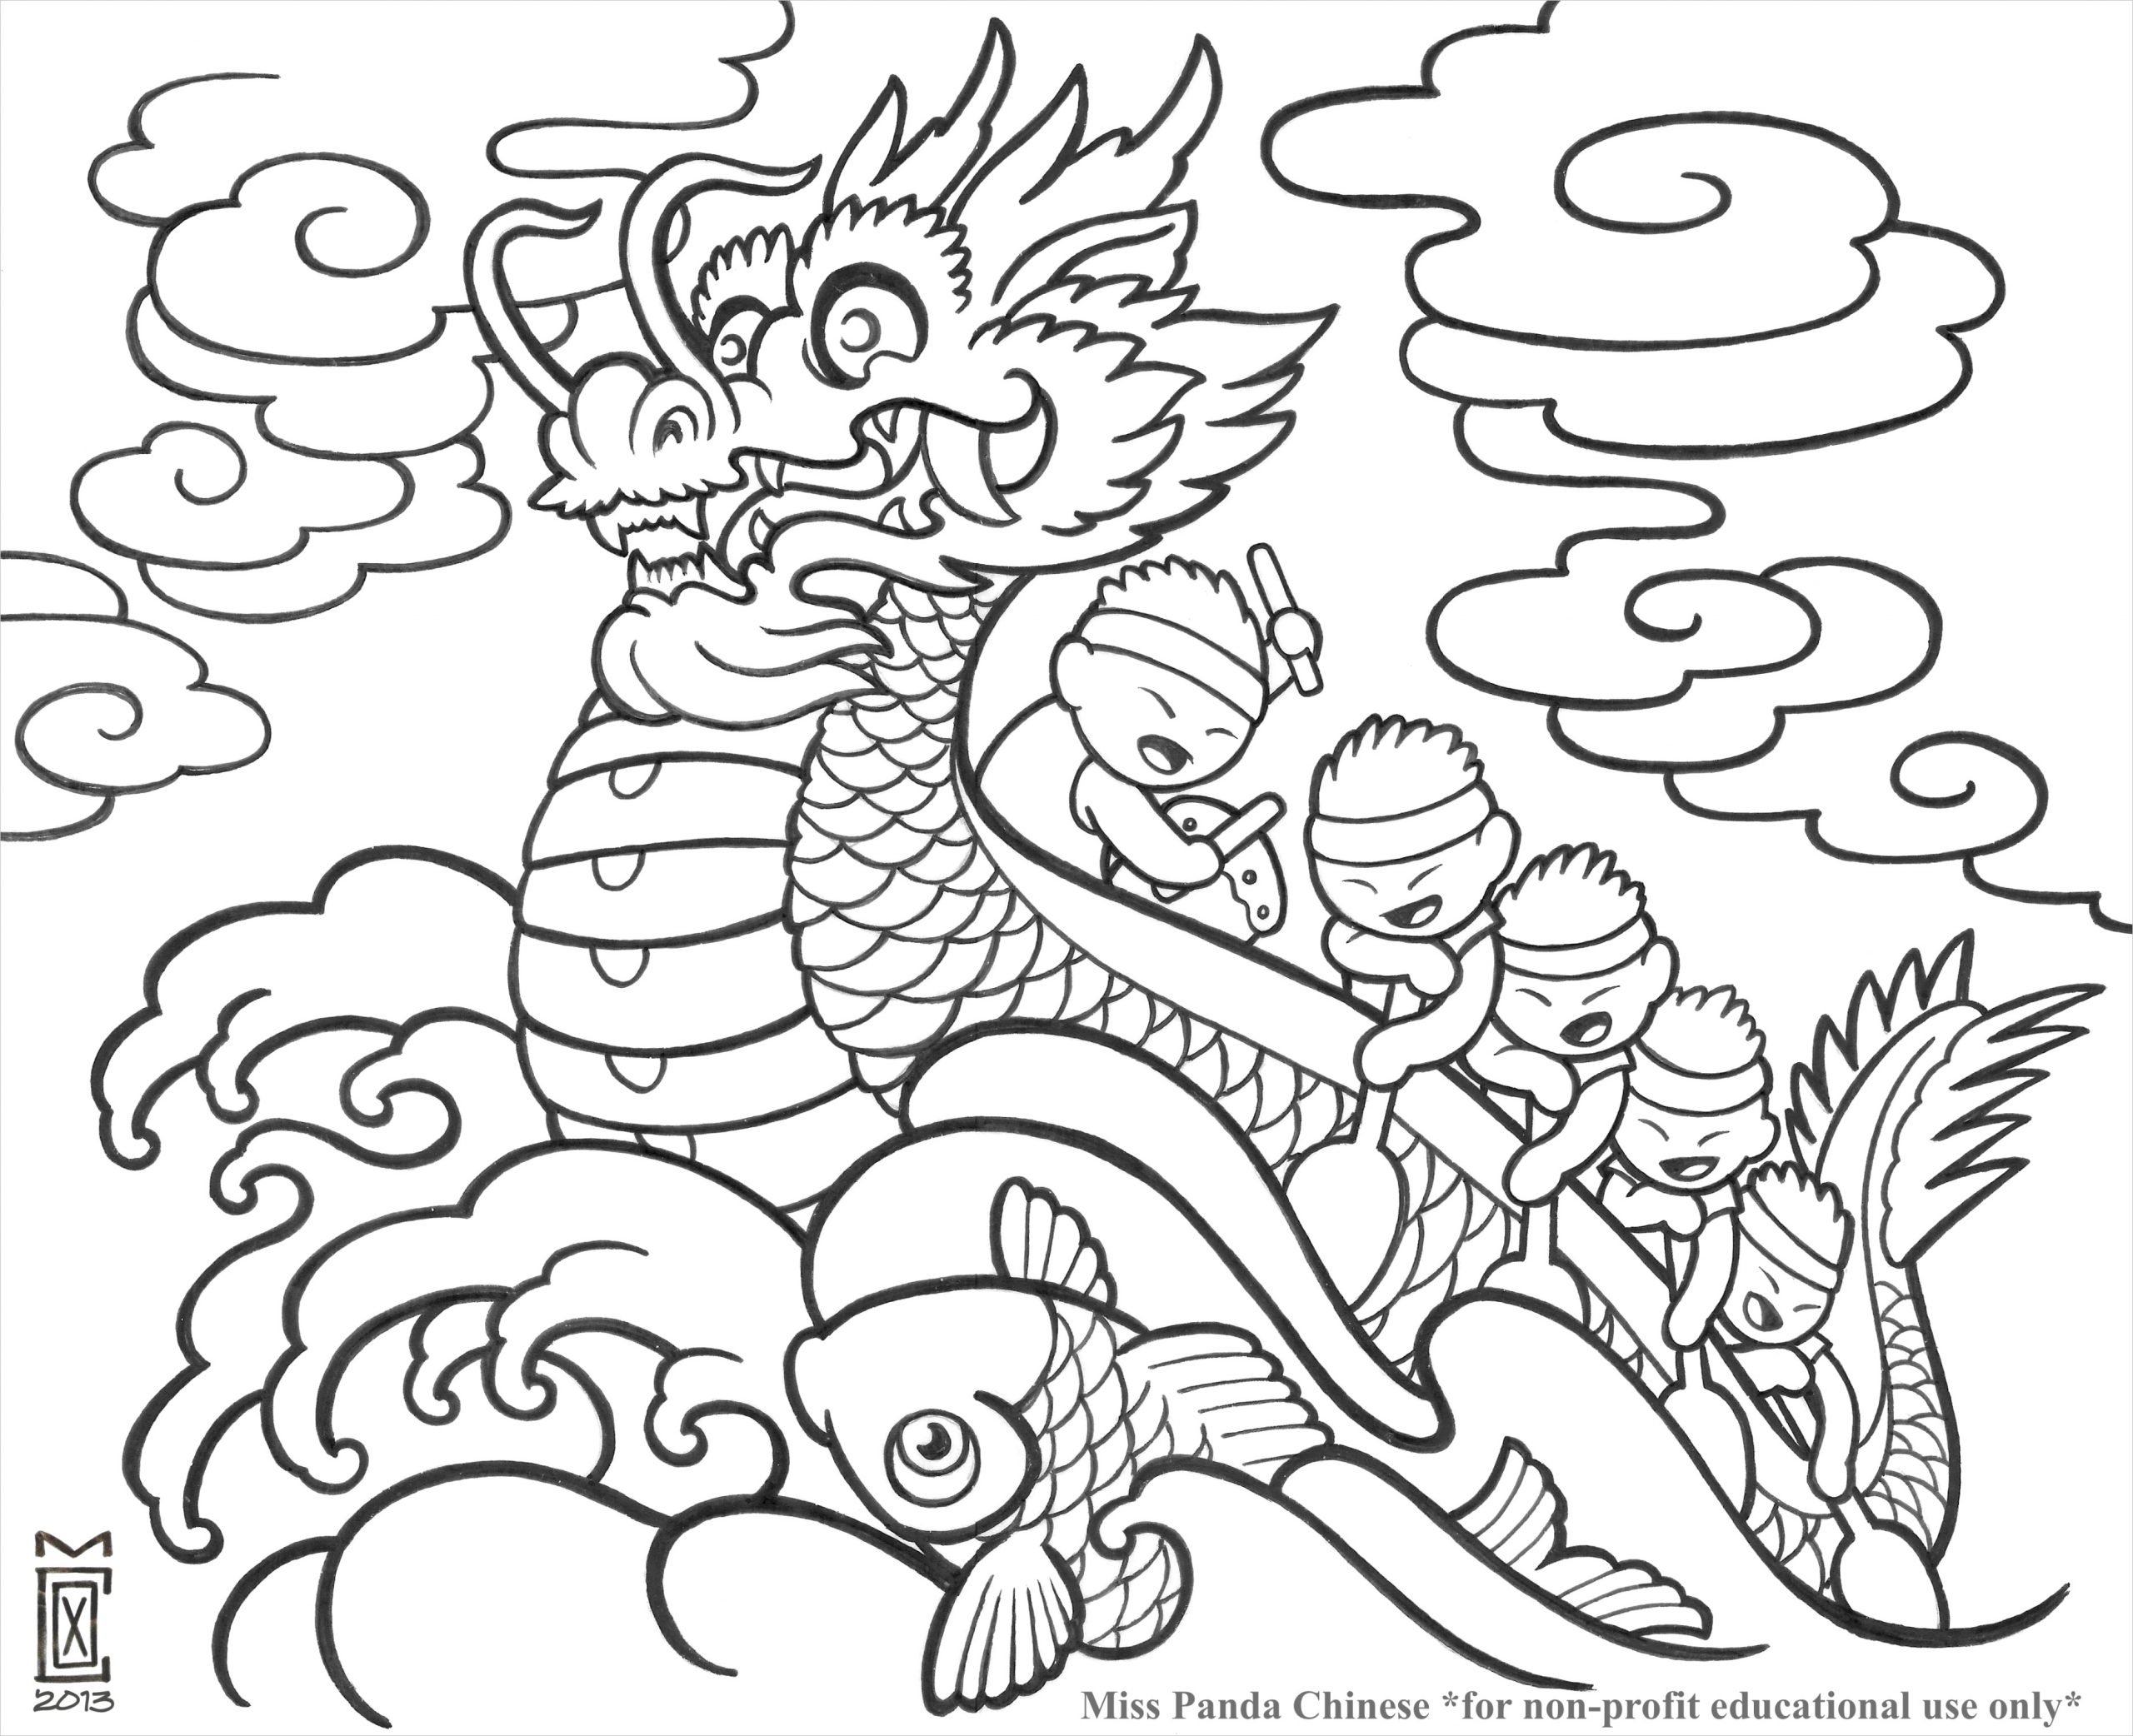 dragon boat festival duan wu jie 端午節 coloring pages